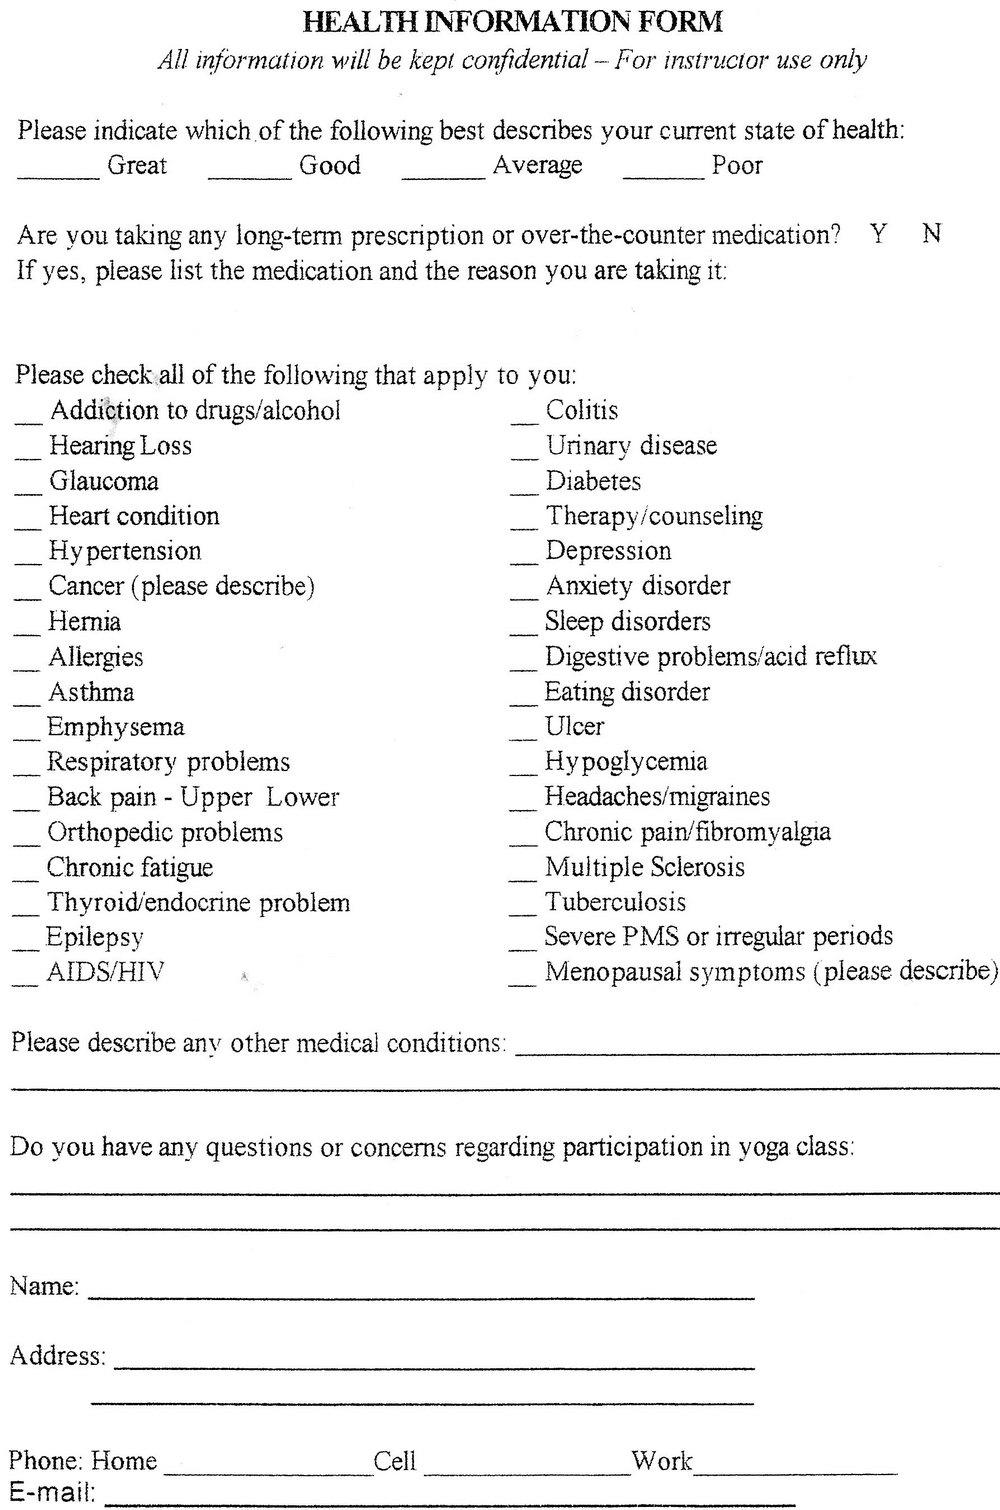 Yoga Waiver Form Template